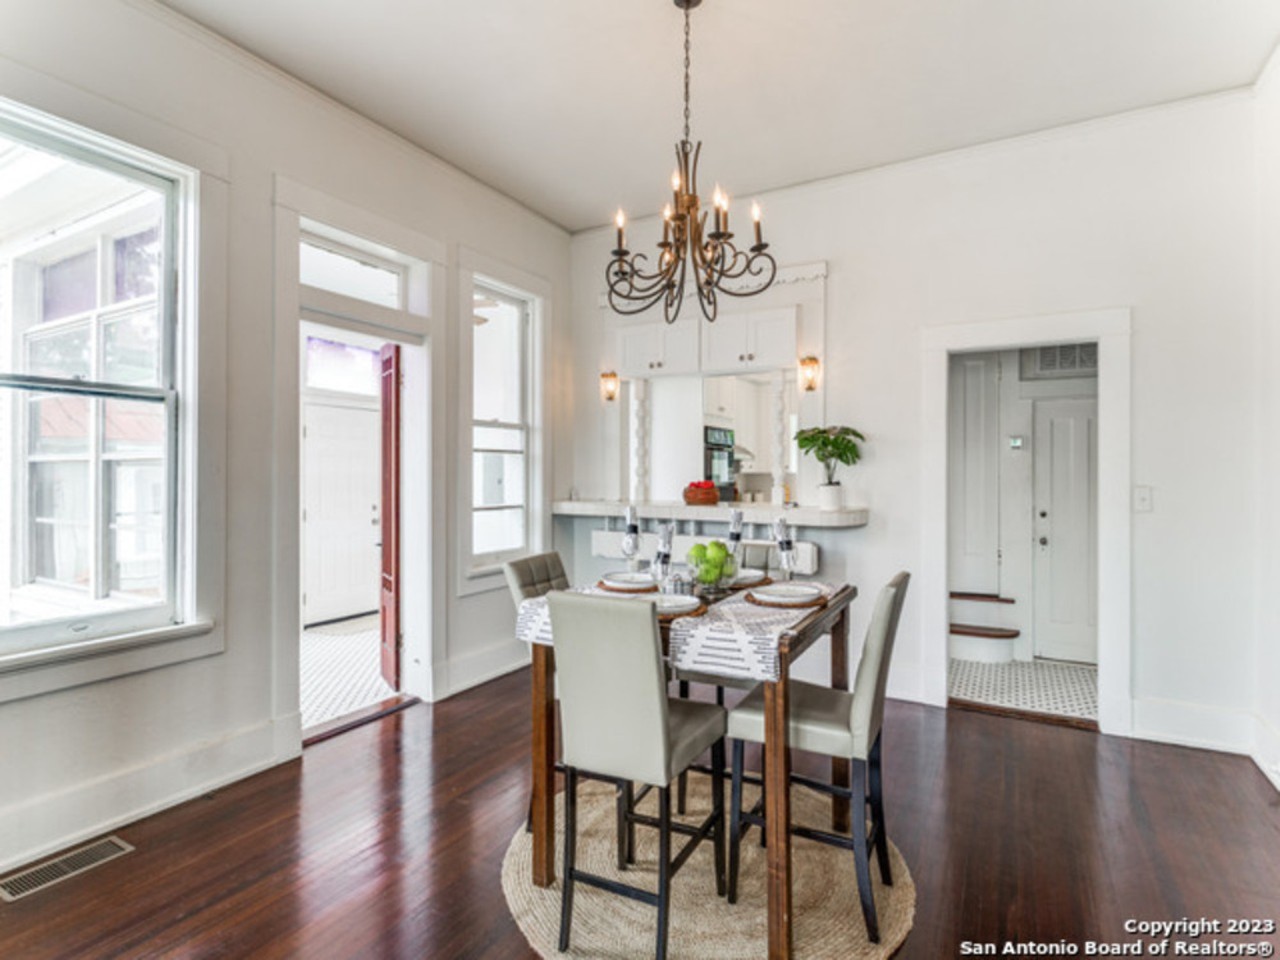 After major reno, one of the few brick homes in the King William area is back on the market